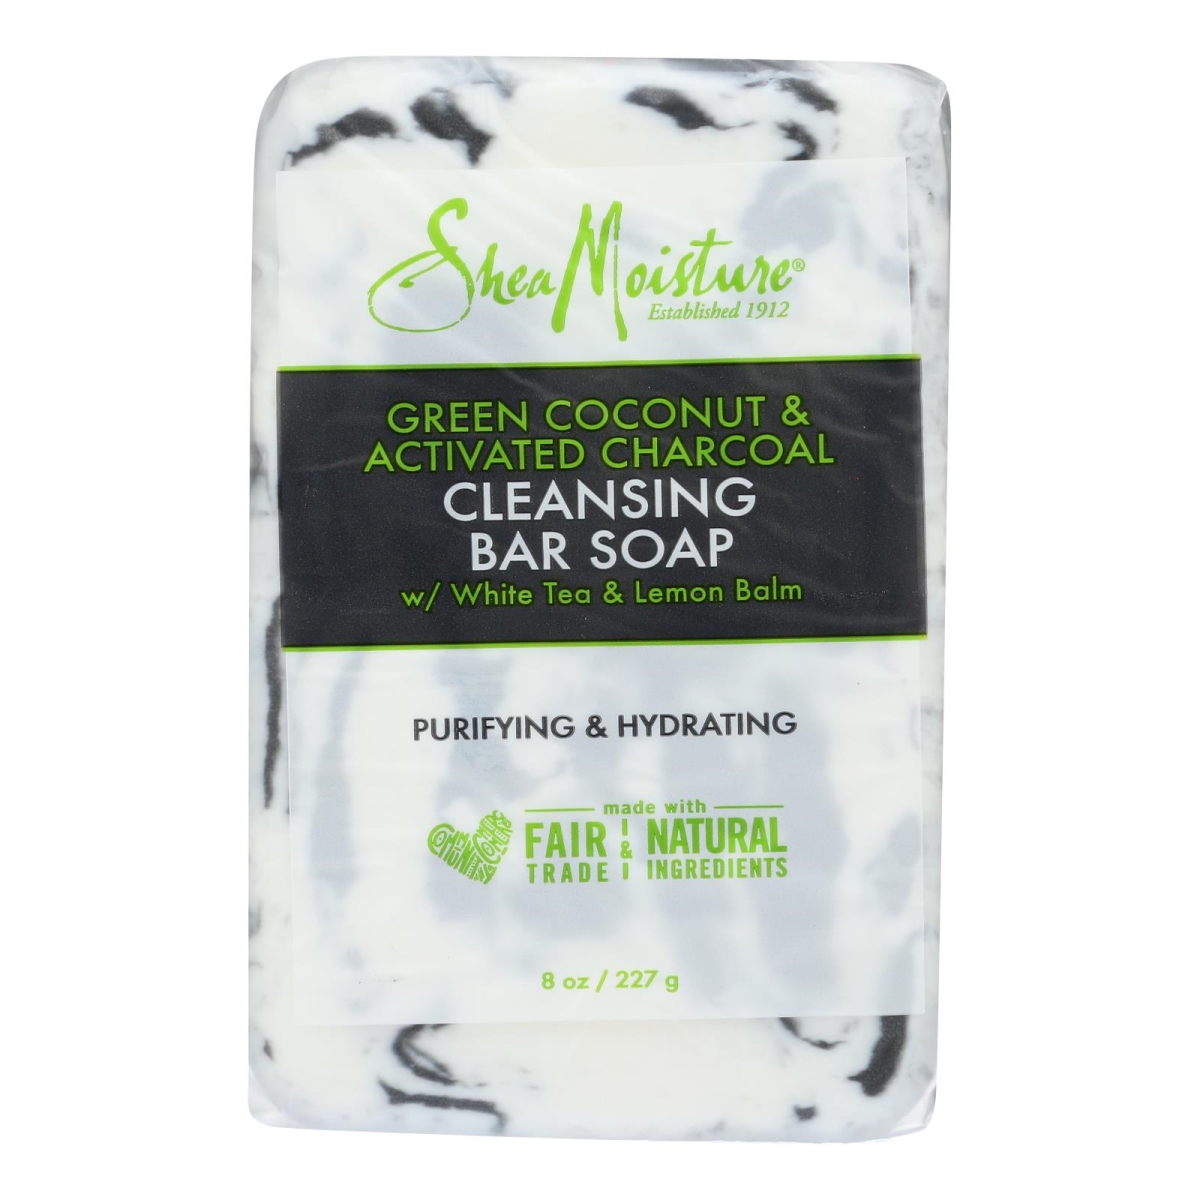 2450708 8 Oz Green Coconut & Activated Charcoal Cleansing Bar Soap